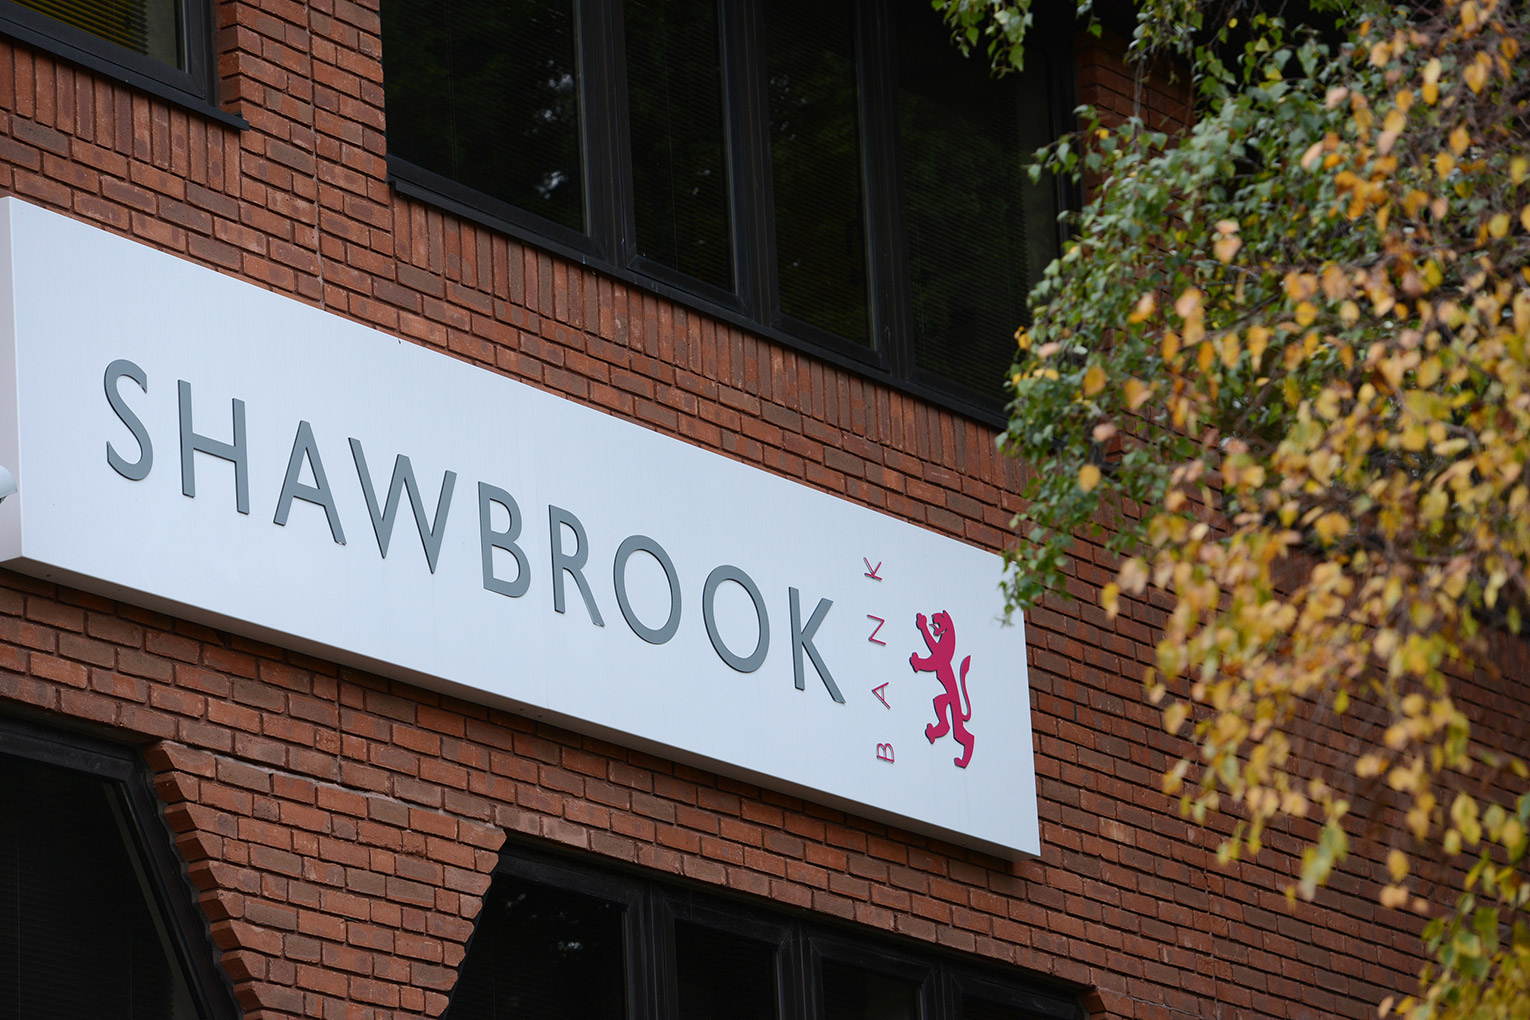 Shawbrook completes refinance and capital raise in 17 days